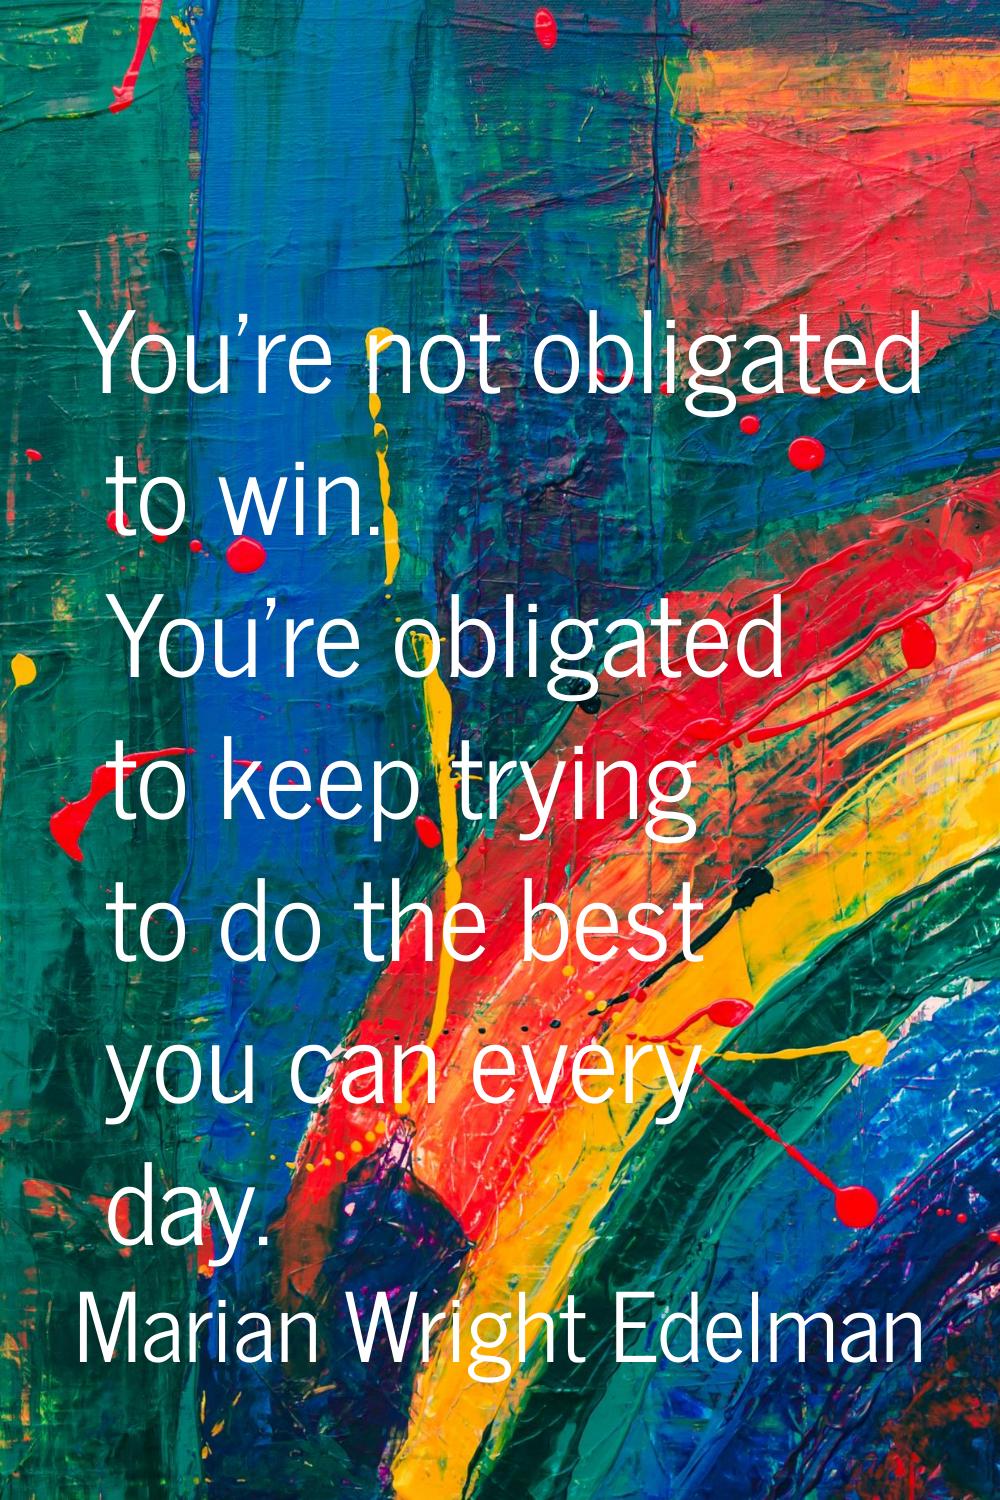 You're not obligated to win. You're obligated to keep trying to do the best you can every day.